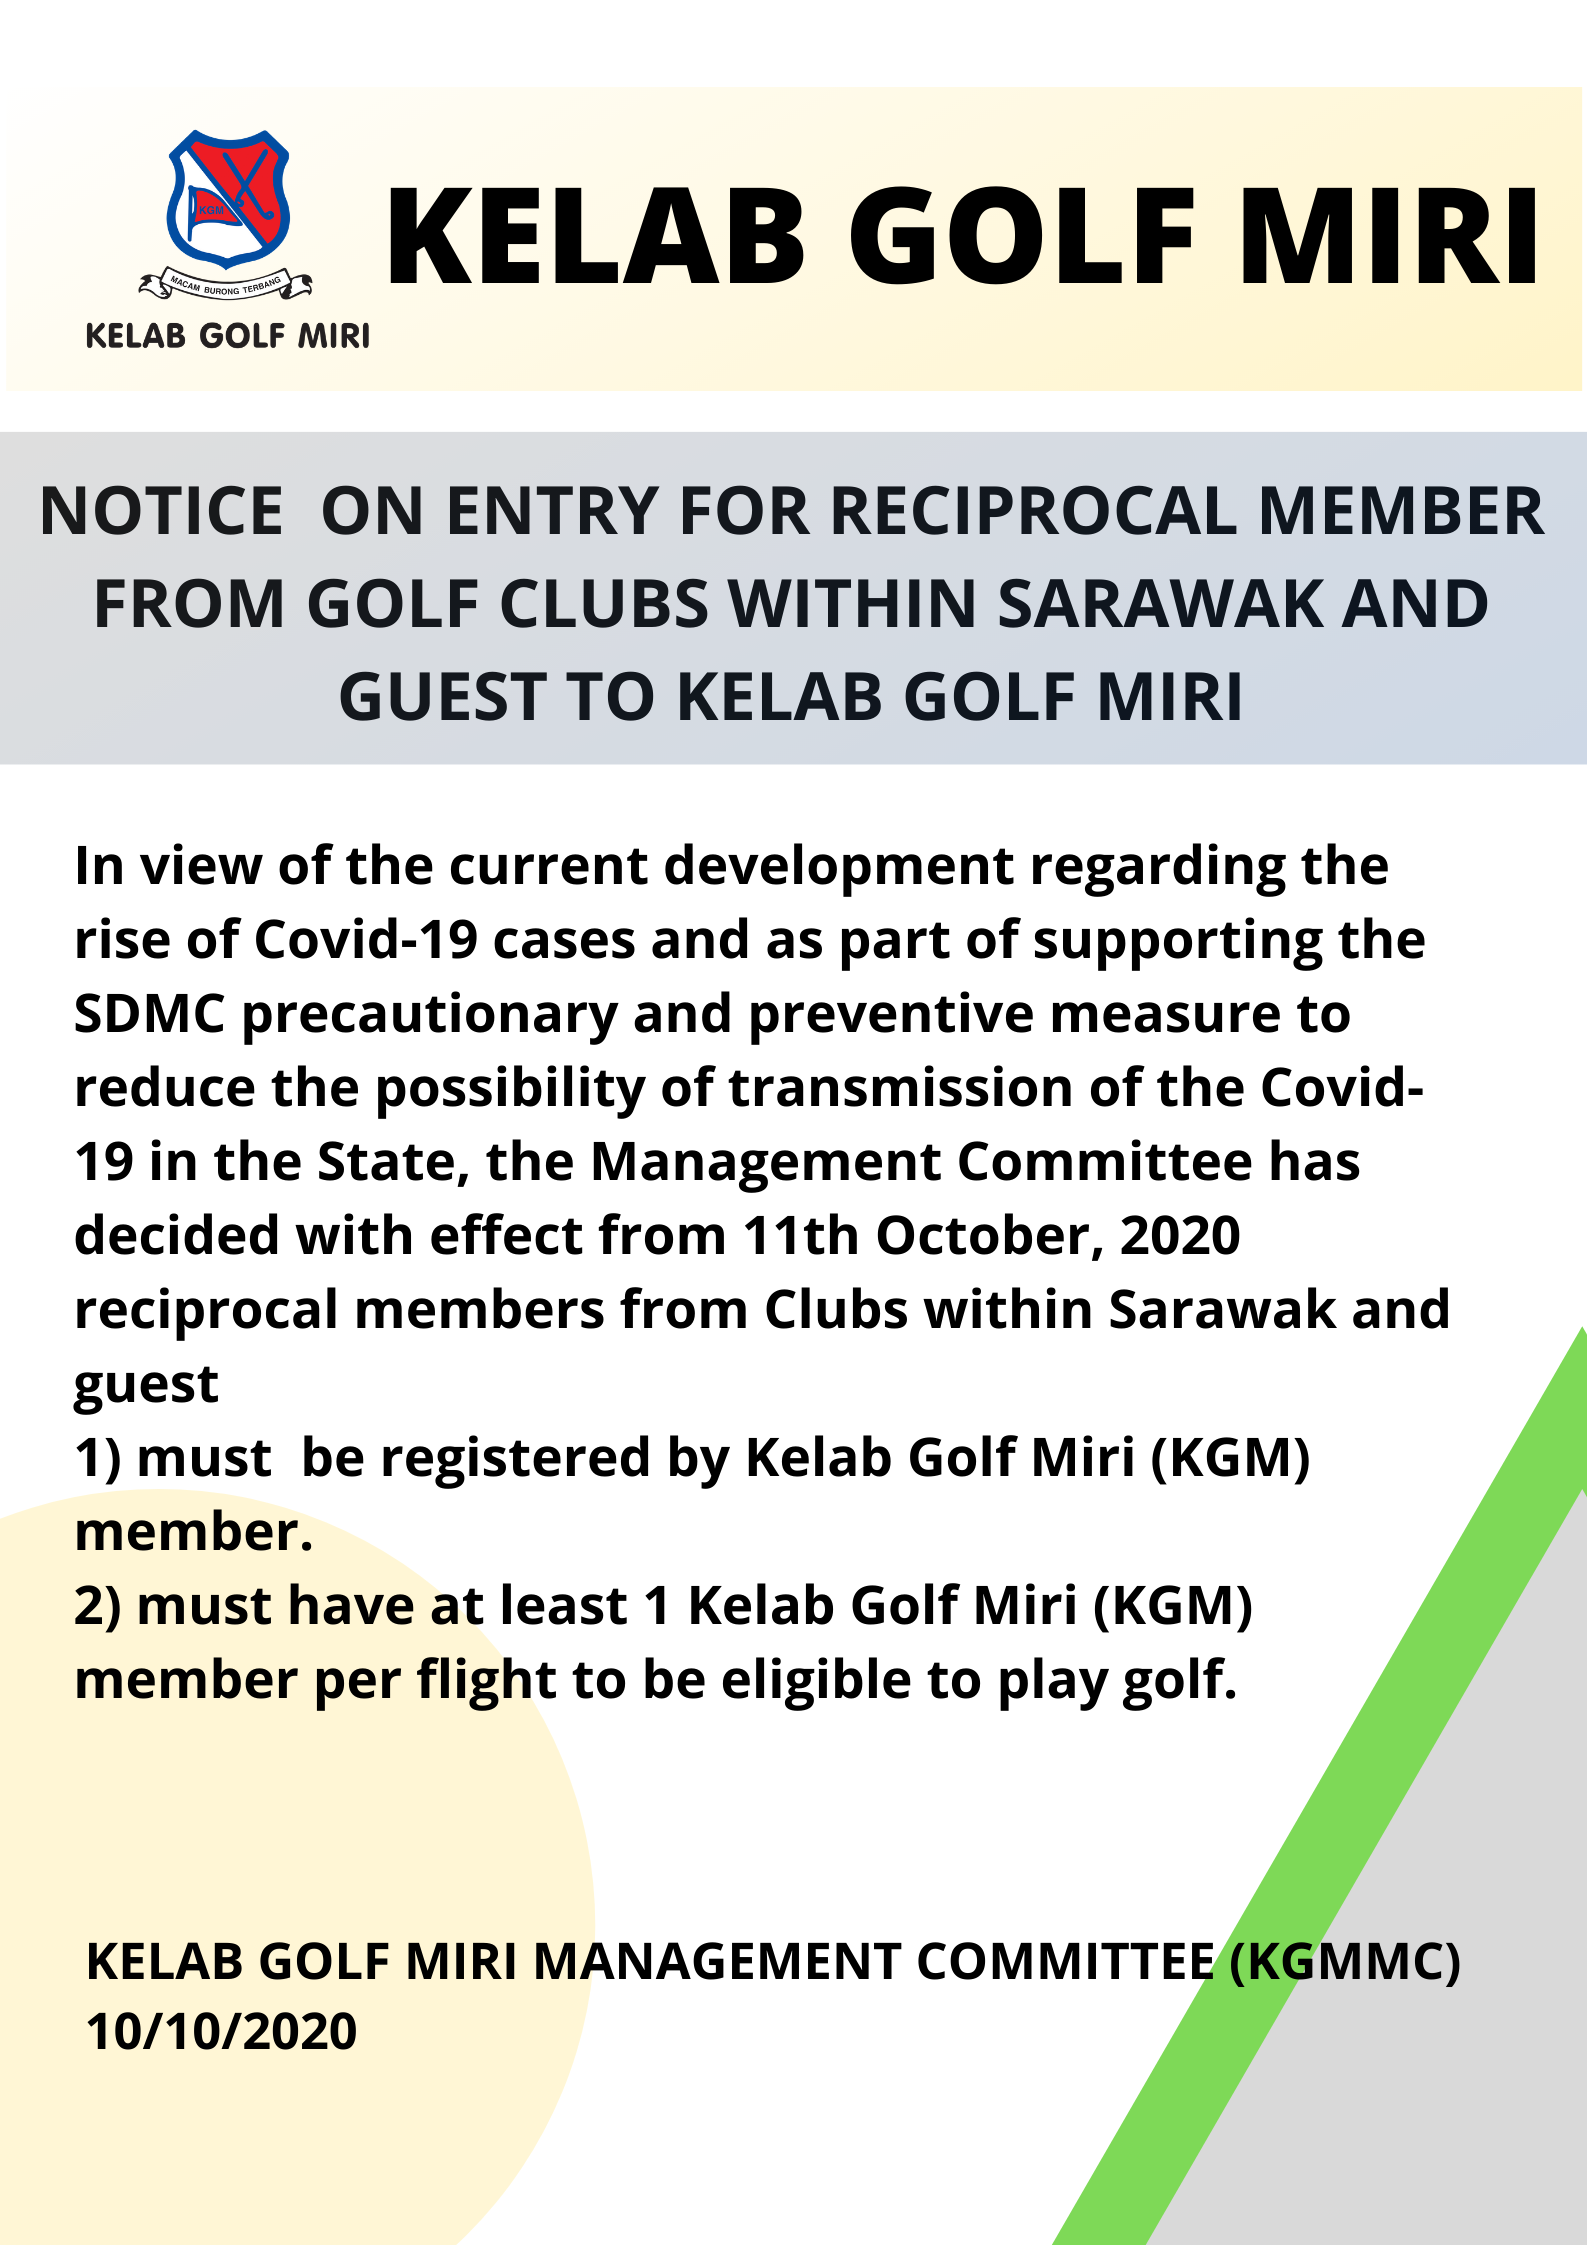 notice of entry for rcp mbr from clubs within swk to kgm 2020 10 10